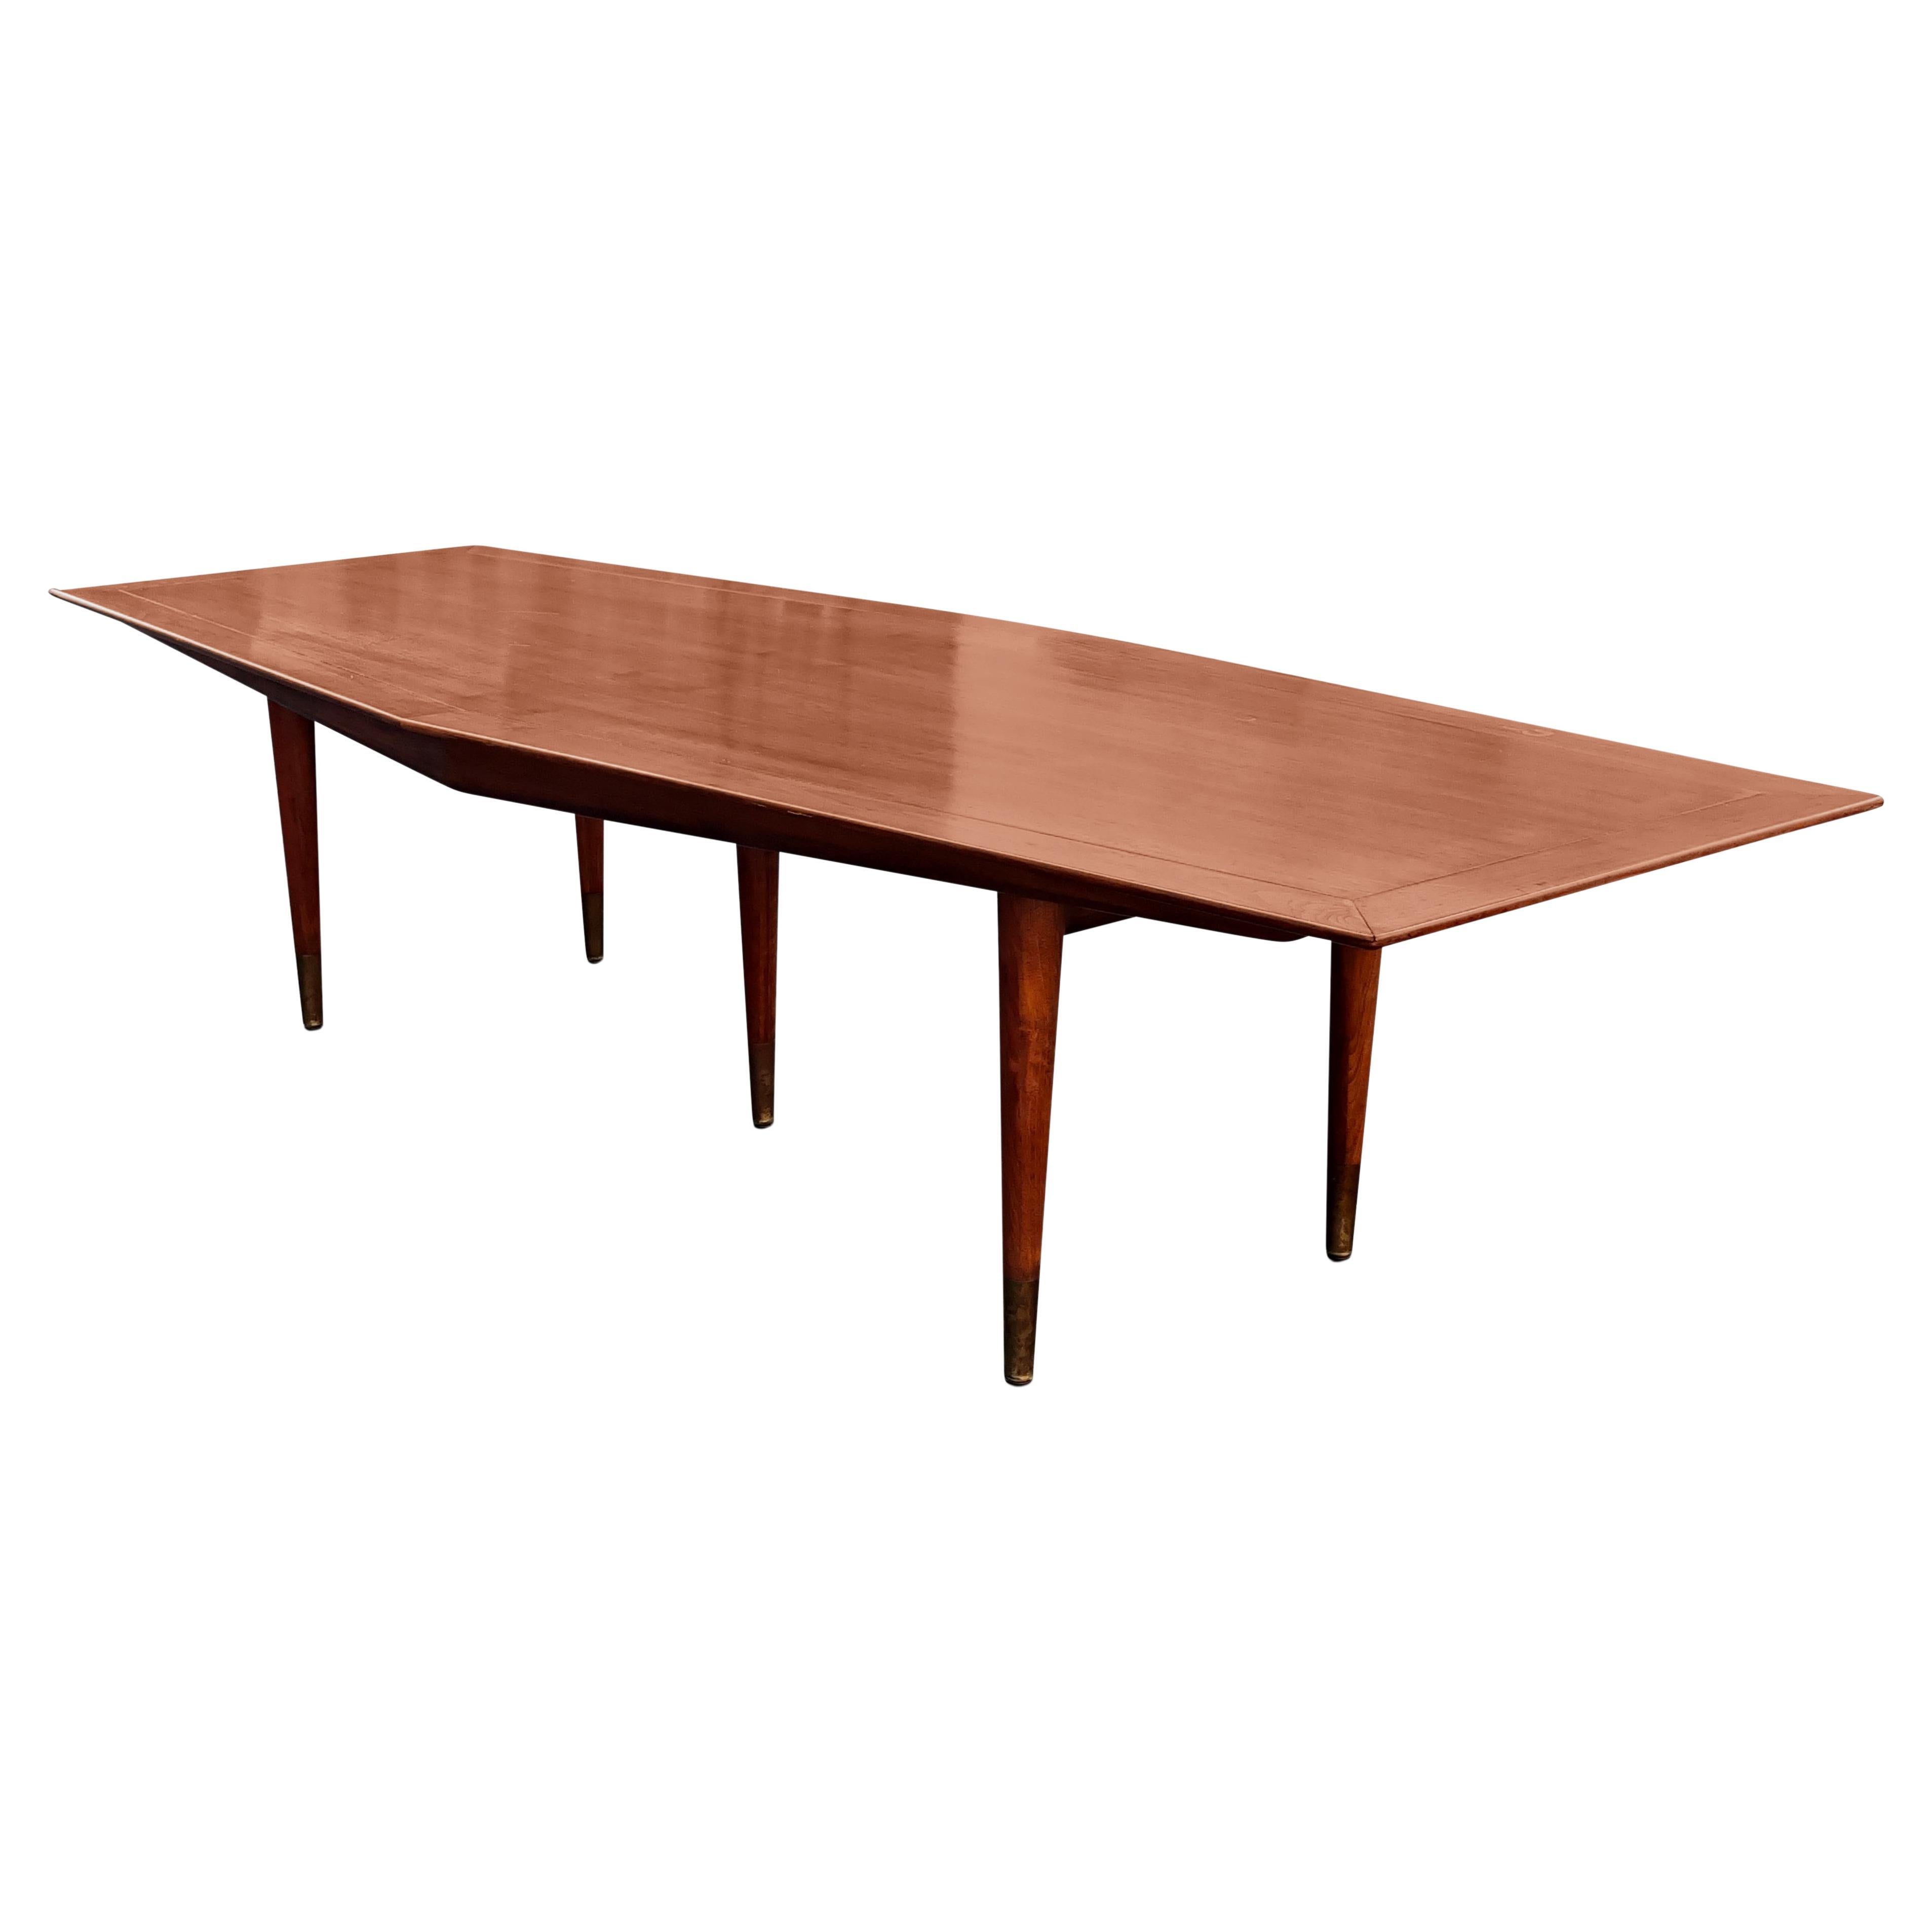 10' Conference or Dining Table by Giacomo Buzzitta for Stow & Davis Walnut Brass